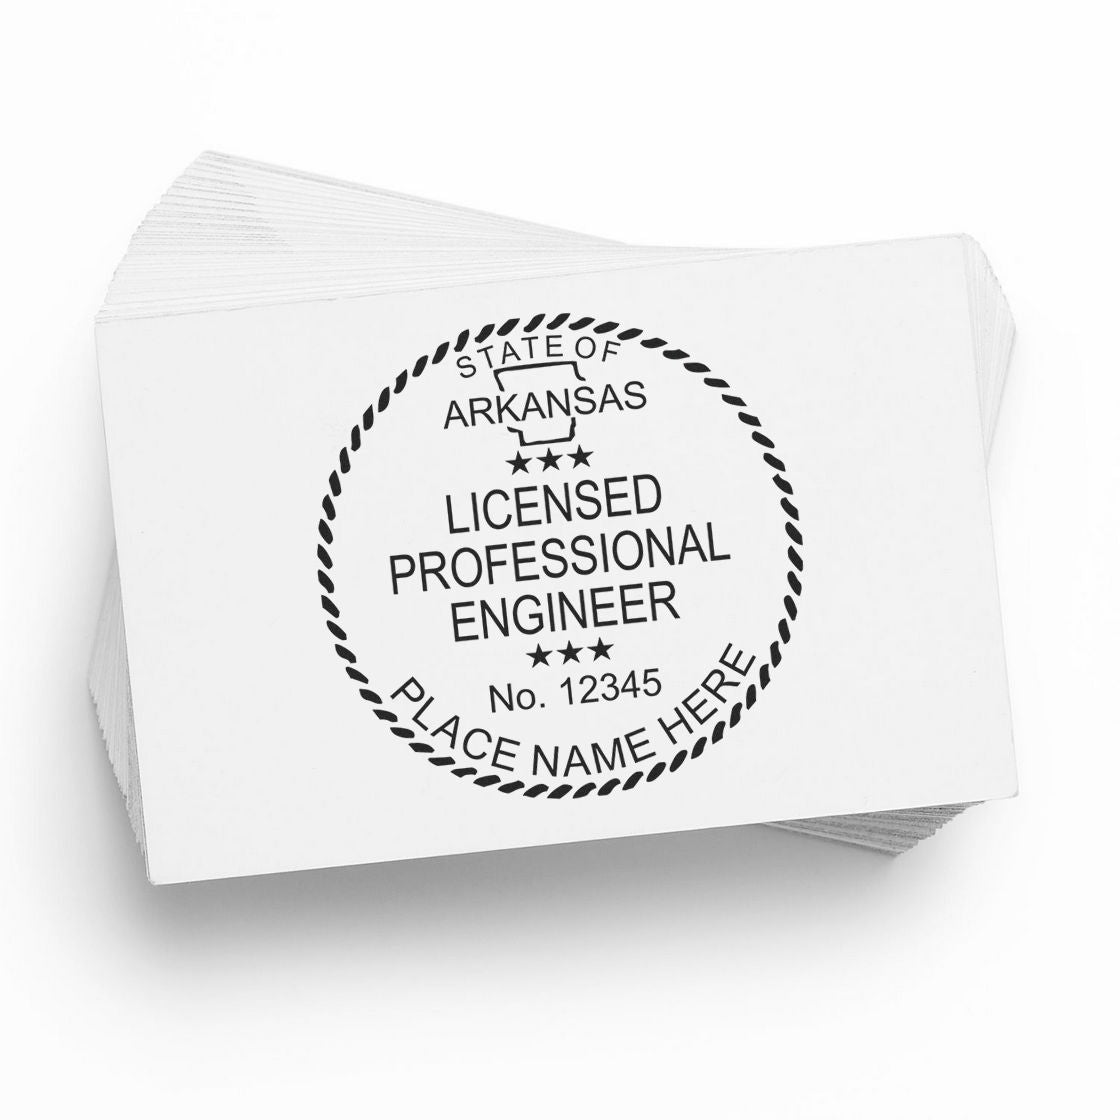 The main image for the Slim Pre-Inked Arkansas Professional Engineer Seal Stamp depicting a sample of the imprint and electronic files